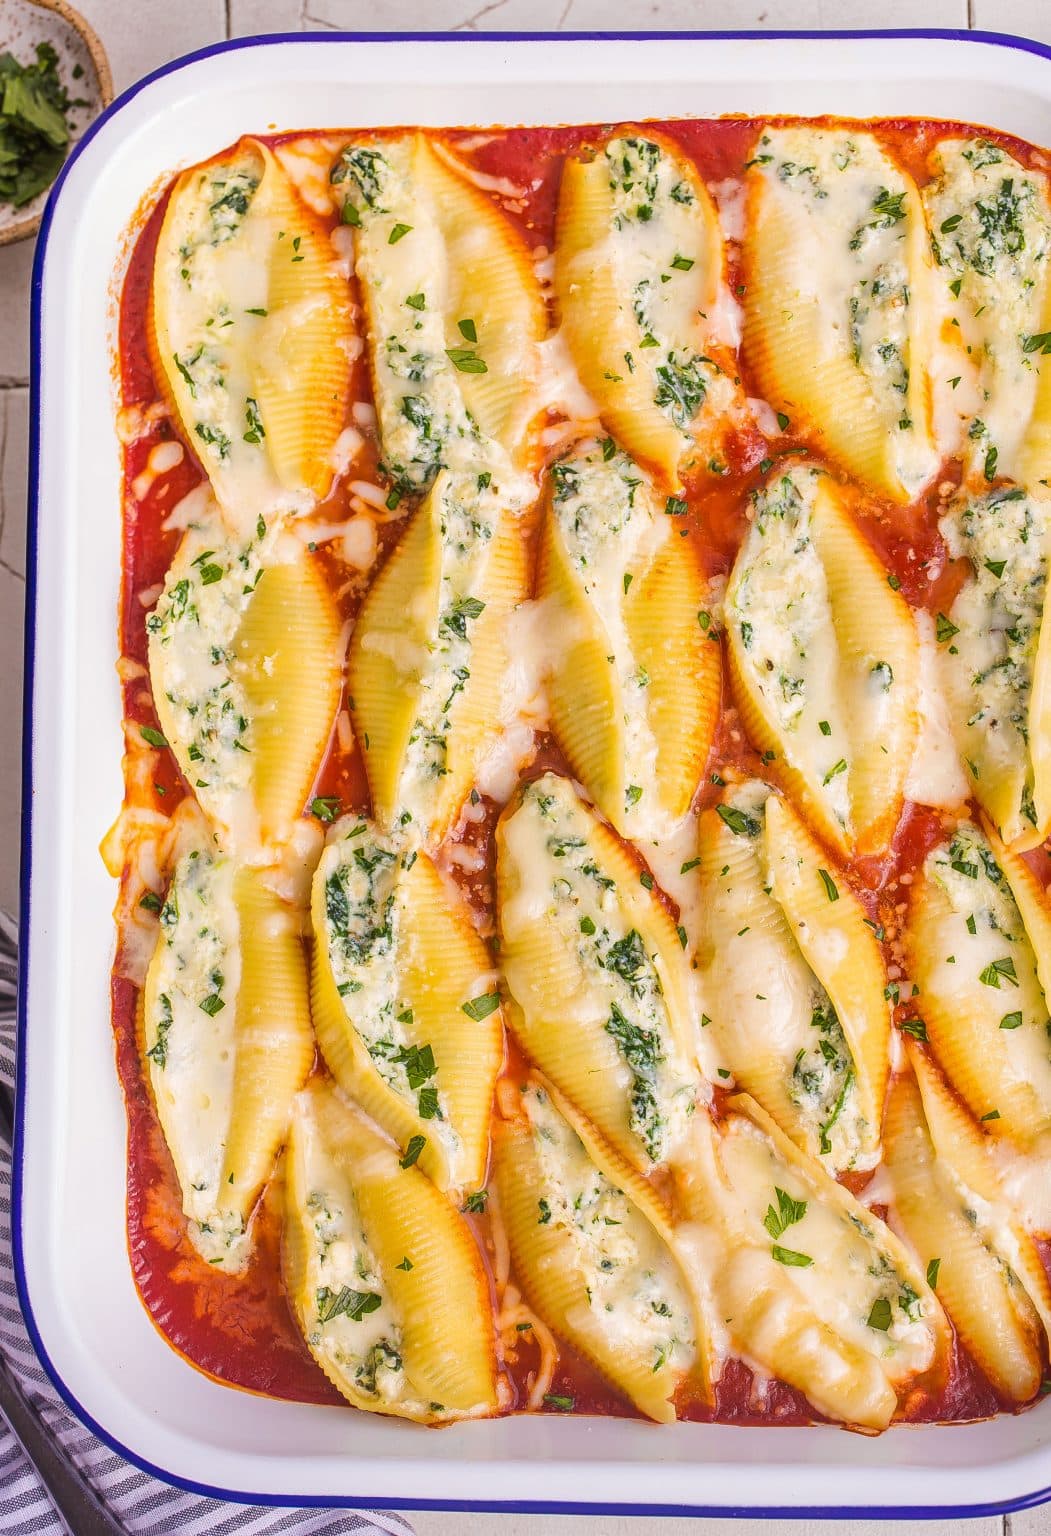 EASY Ricotta Cheese and Spinach Stuffed Pasta Shells